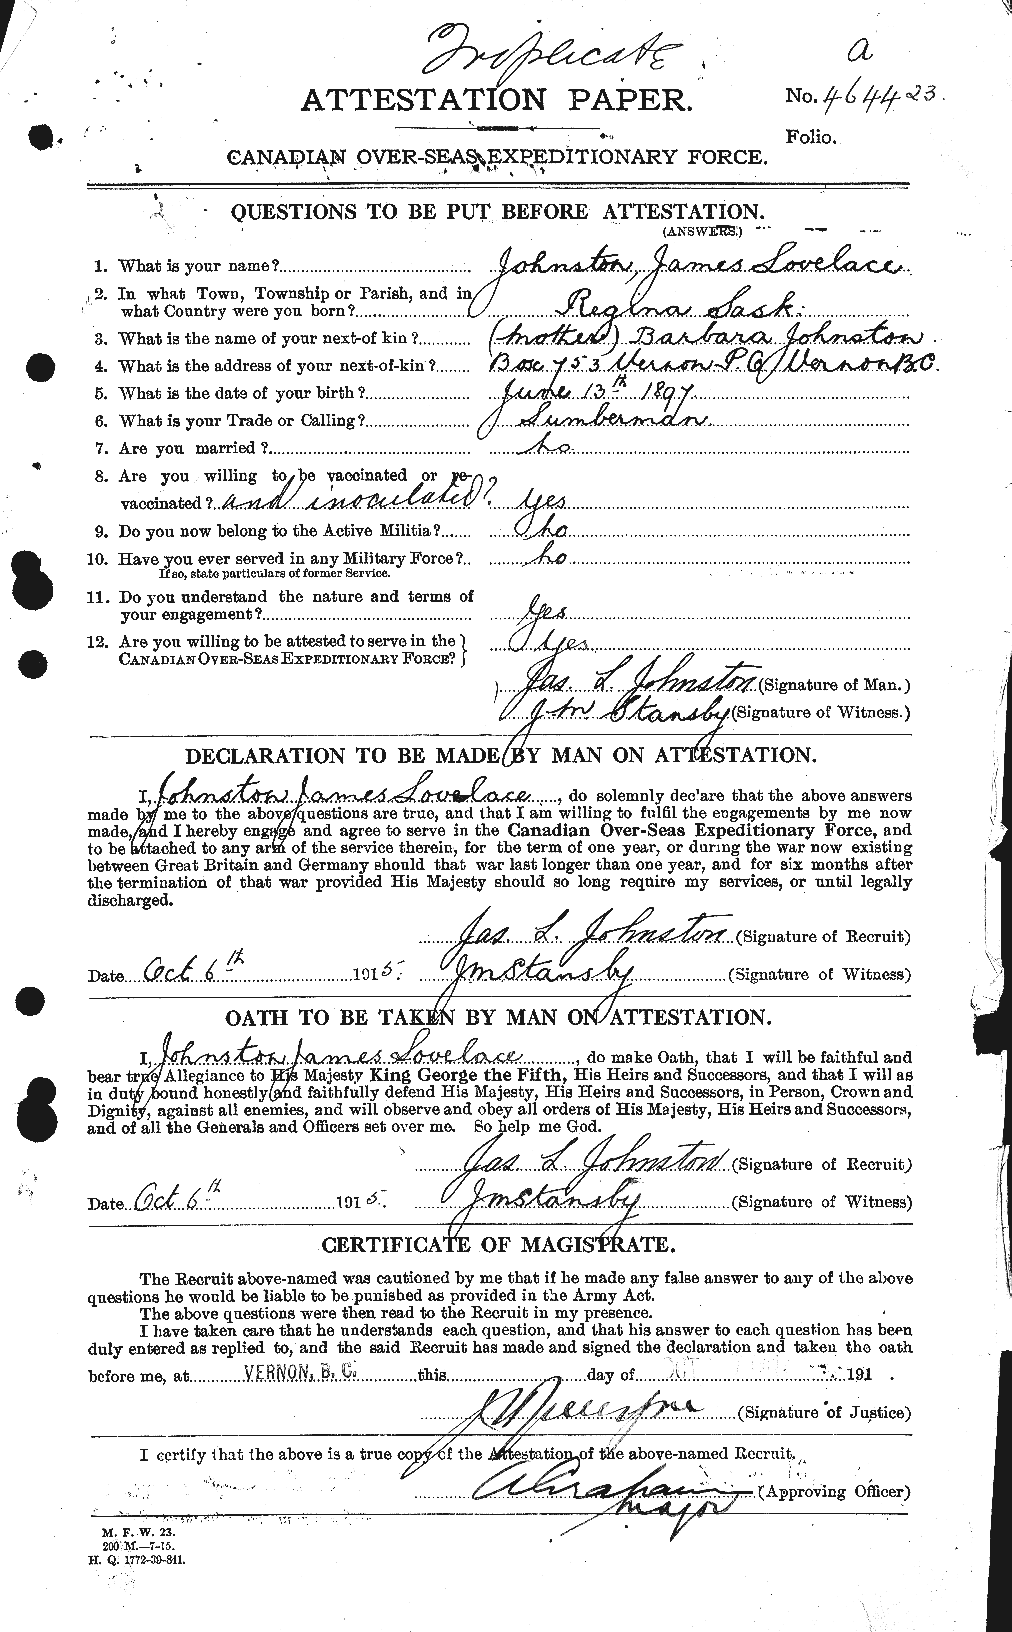 Personnel Records of the First World War - CEF 422740a